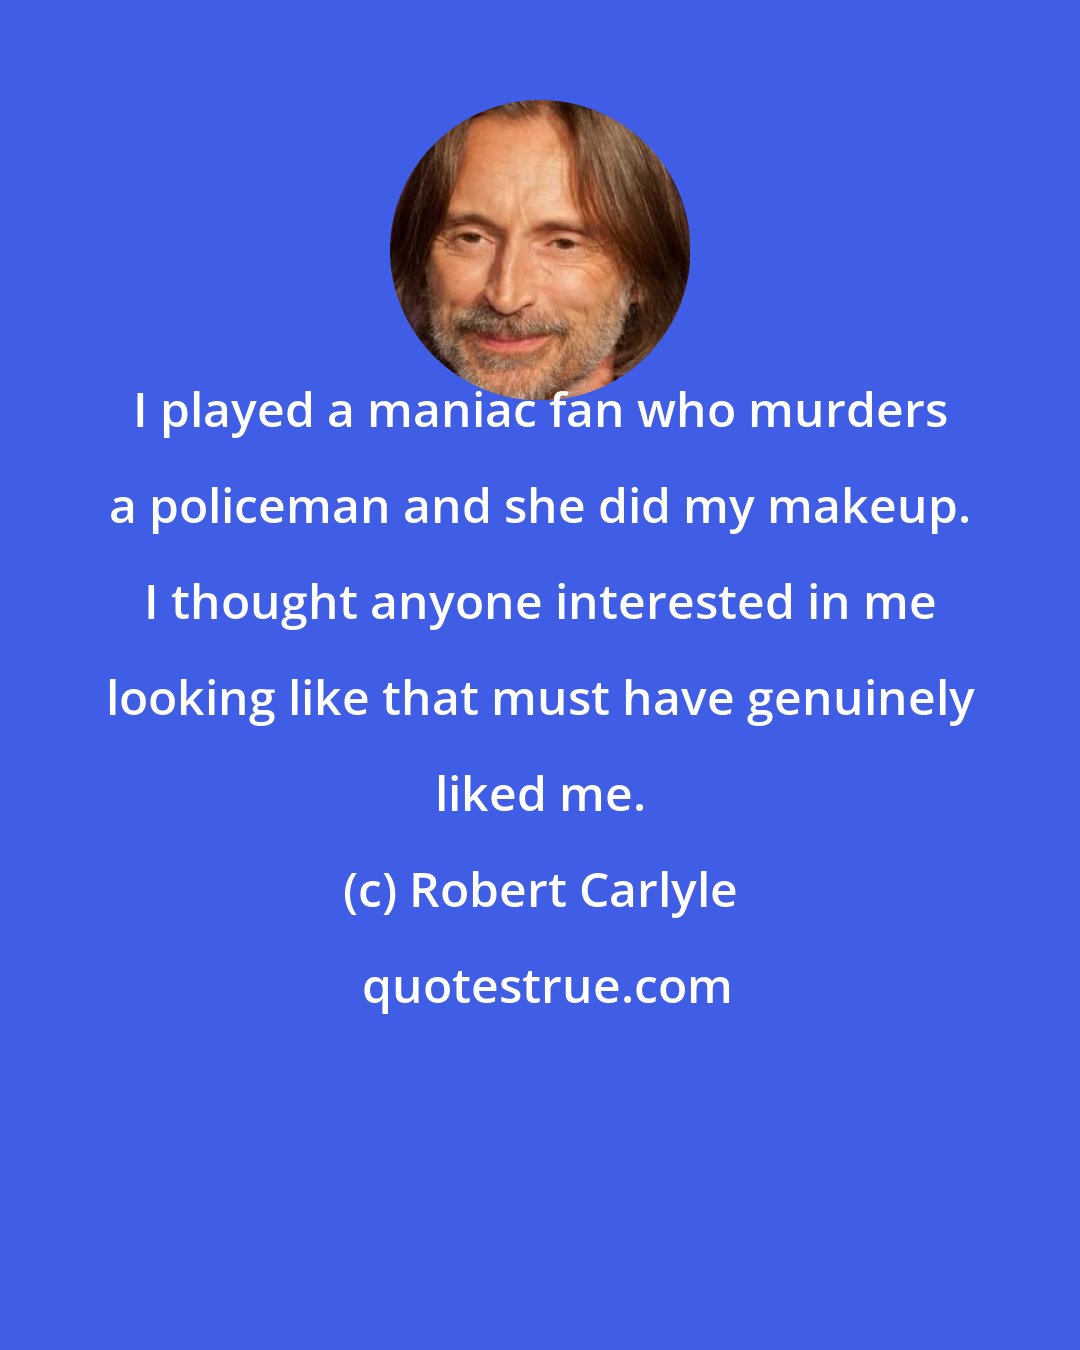 Robert Carlyle: I played a maniac fan who murders a policeman and she did my makeup. I thought anyone interested in me looking like that must have genuinely liked me.